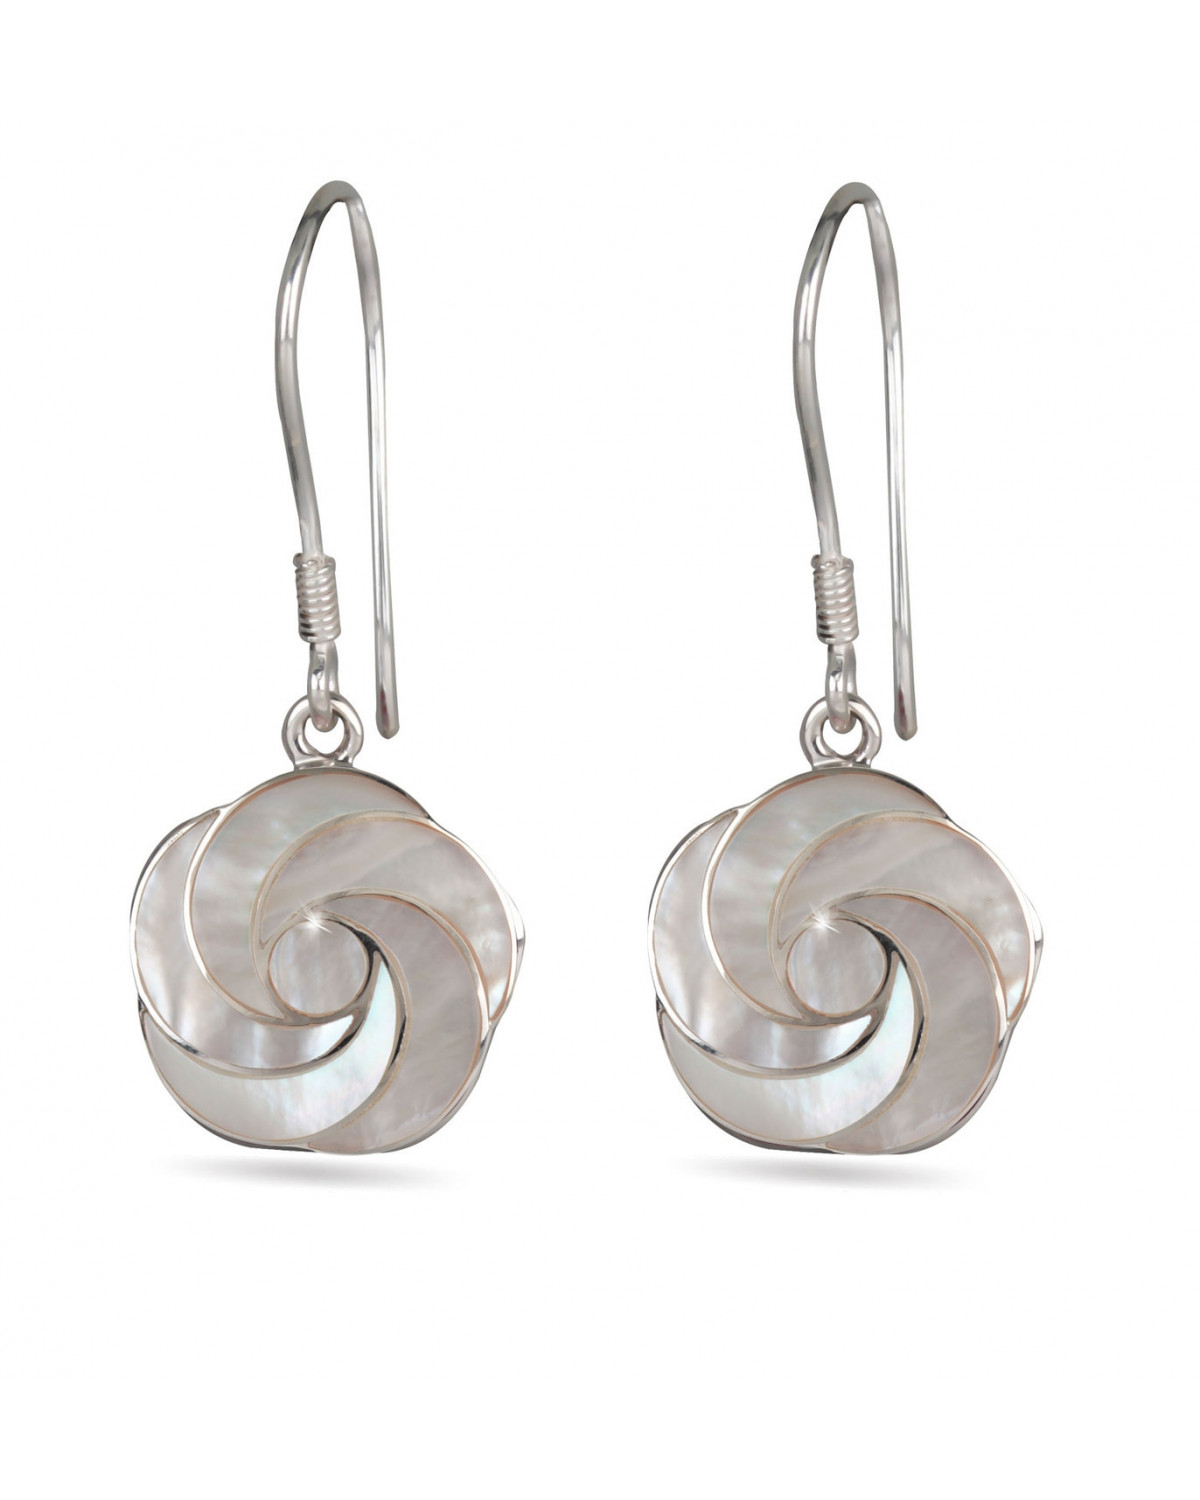 White Mother-of-Pearl and Silver Spiral Flower Earrings 925